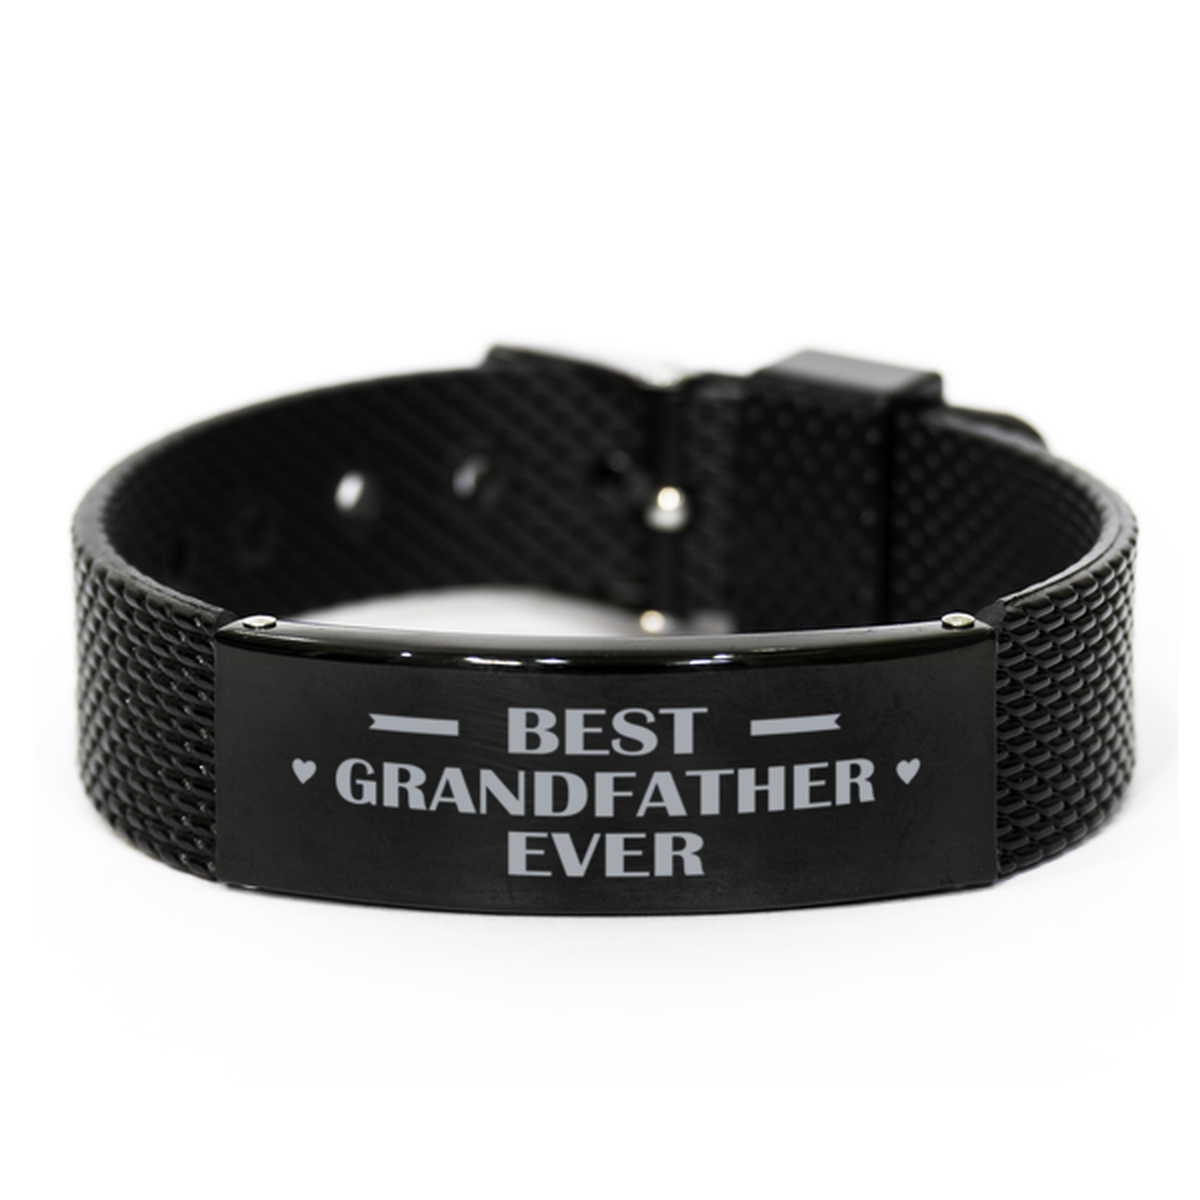 Best Grandfather Ever Grandfather Gifts, Gag Engraved Bracelet For Grandfather, Best Family Gifts For Men